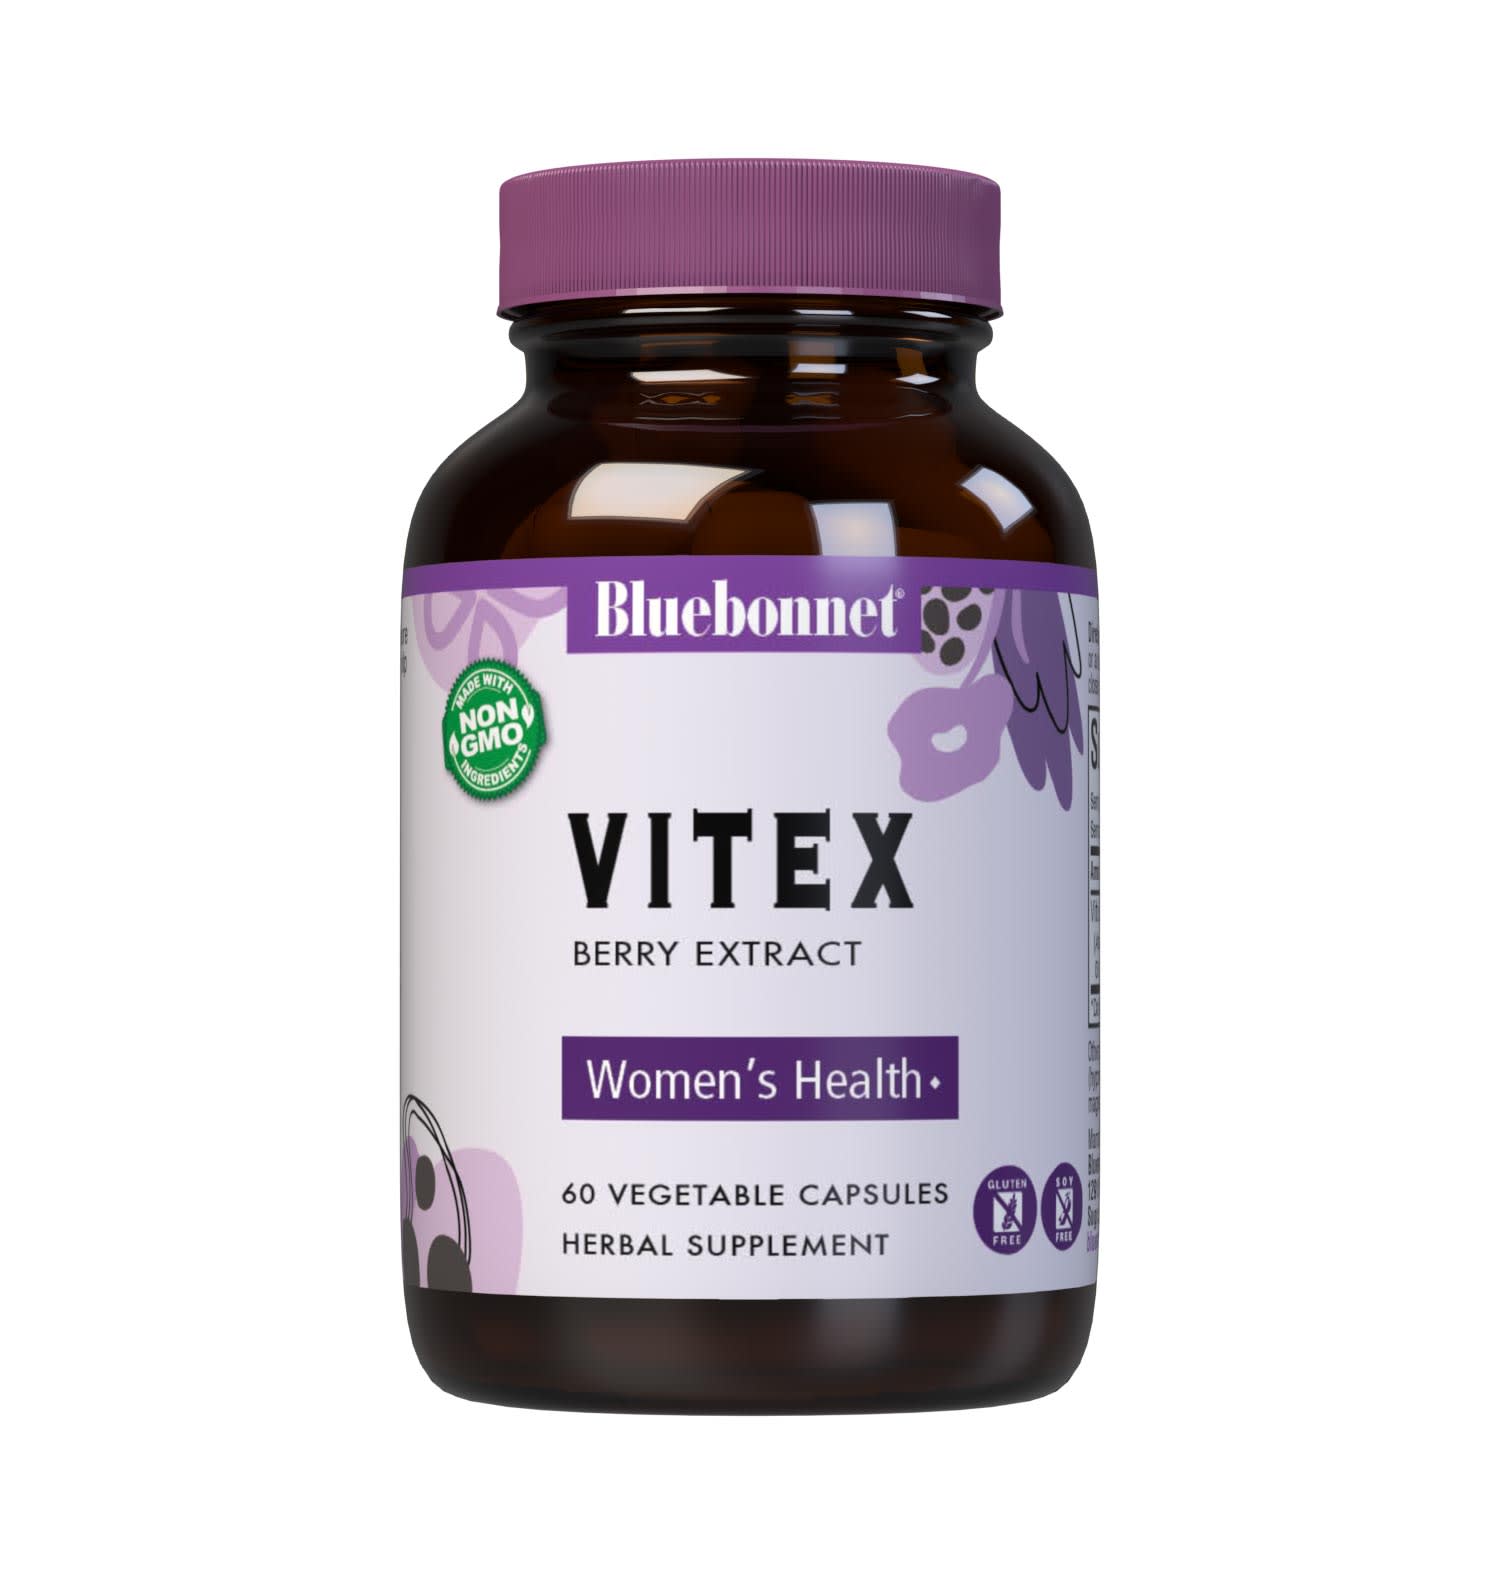 Bluebonnet’s Vitex Berry Extract 60 Vegetable Capsules contain a standardized extract of agnusides, the most researched active constituents found in vitex, which may support women's health. A clean and gentle water-based extraction method is employed to capture and preserve vitex’s most valuable components. #size_60 count